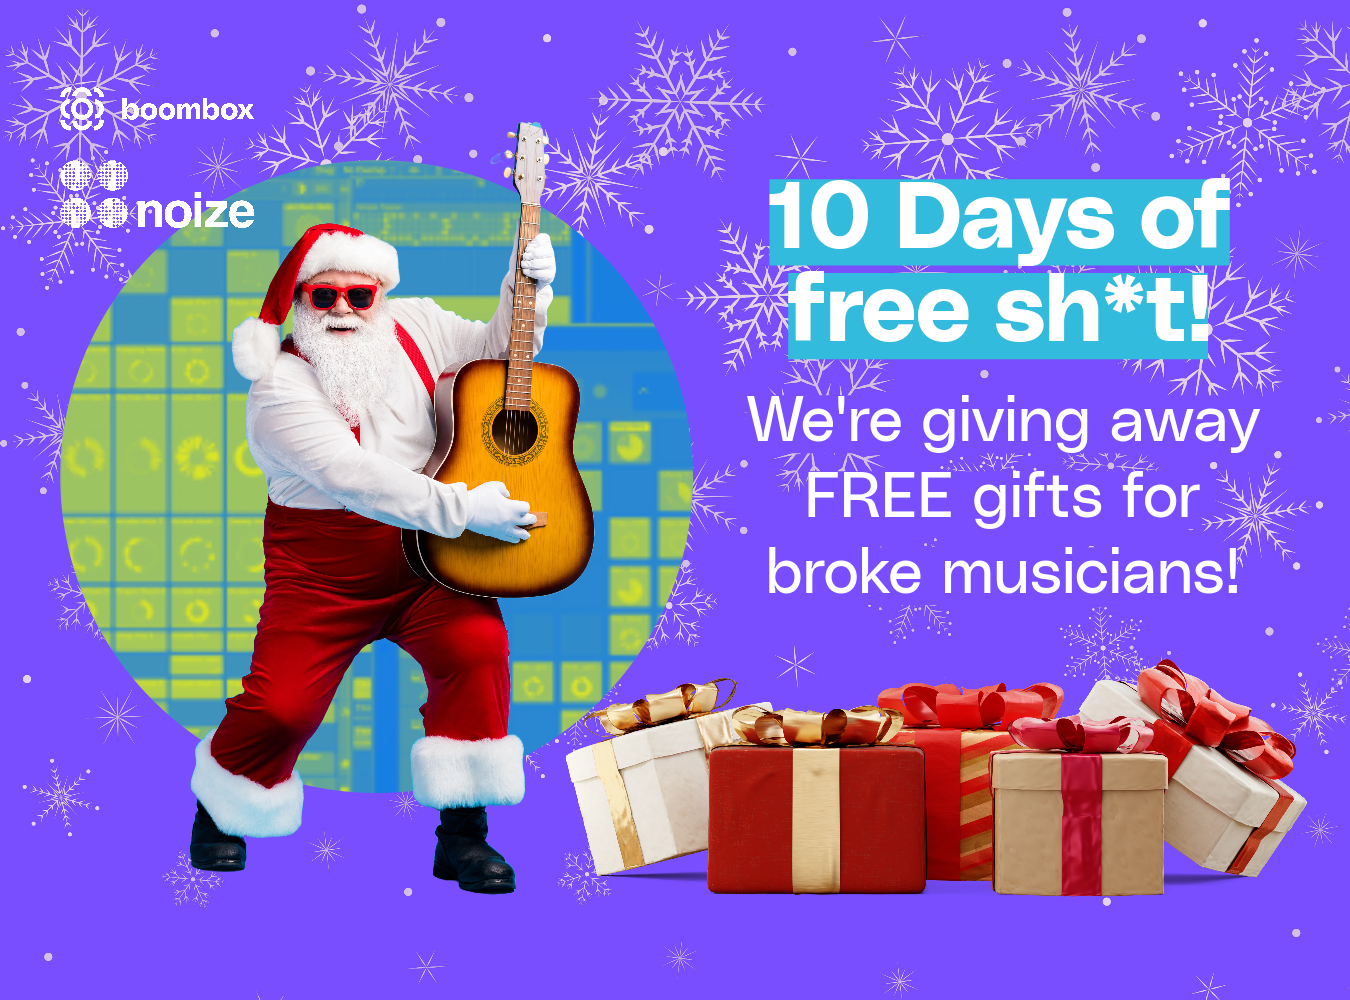 This is a photo of a cool music producer Santa Clause playing the guitar and offering a bunch of music gifts for producers. This is encouraging readers to sign up for the 10 days of christmas giveaway by Boombox.io and Noize London 